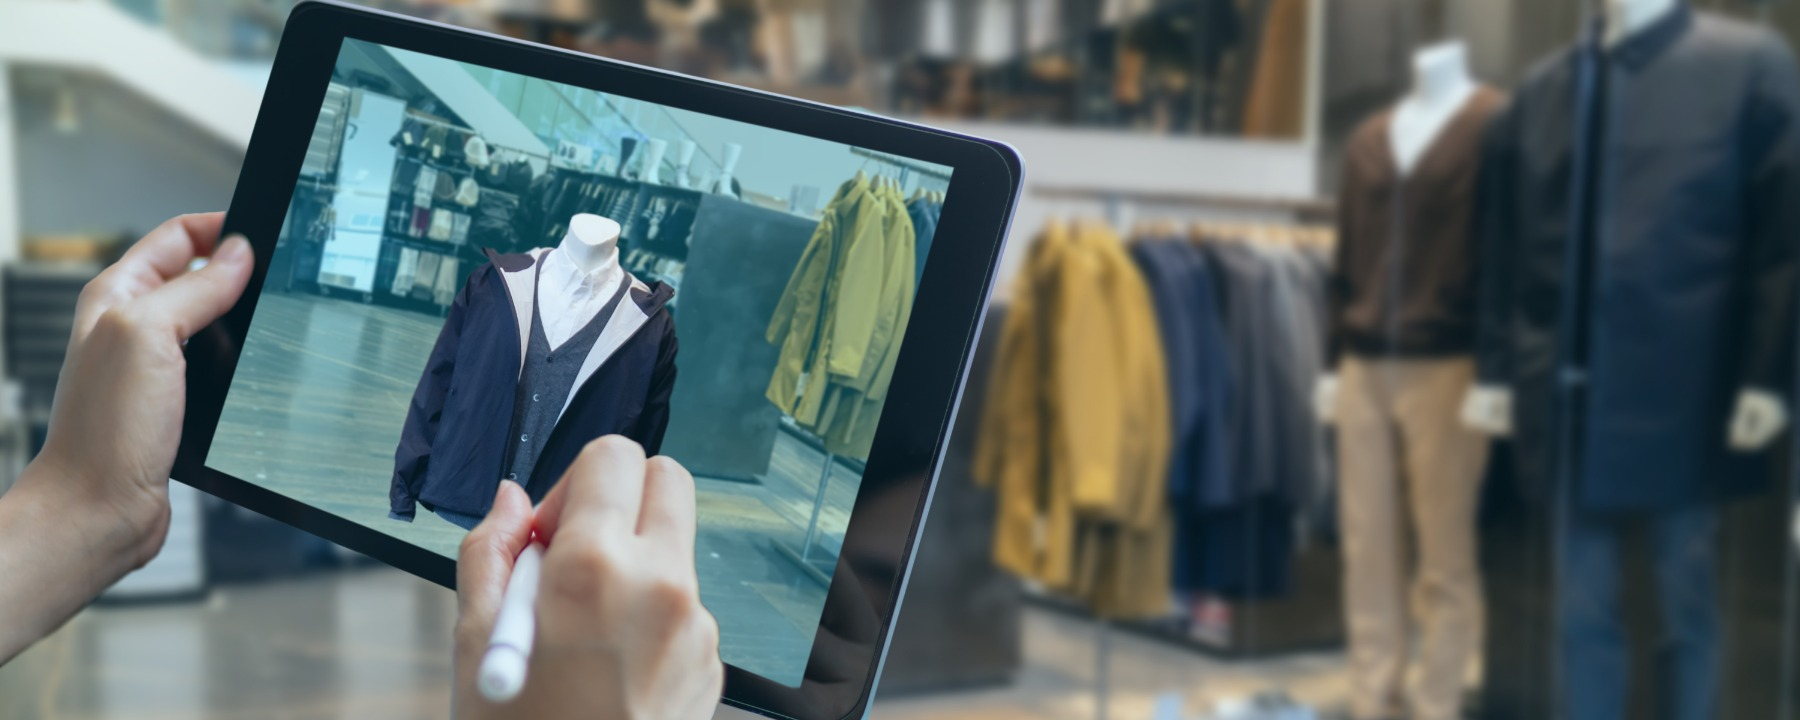 Retail - digital shopping of clothes